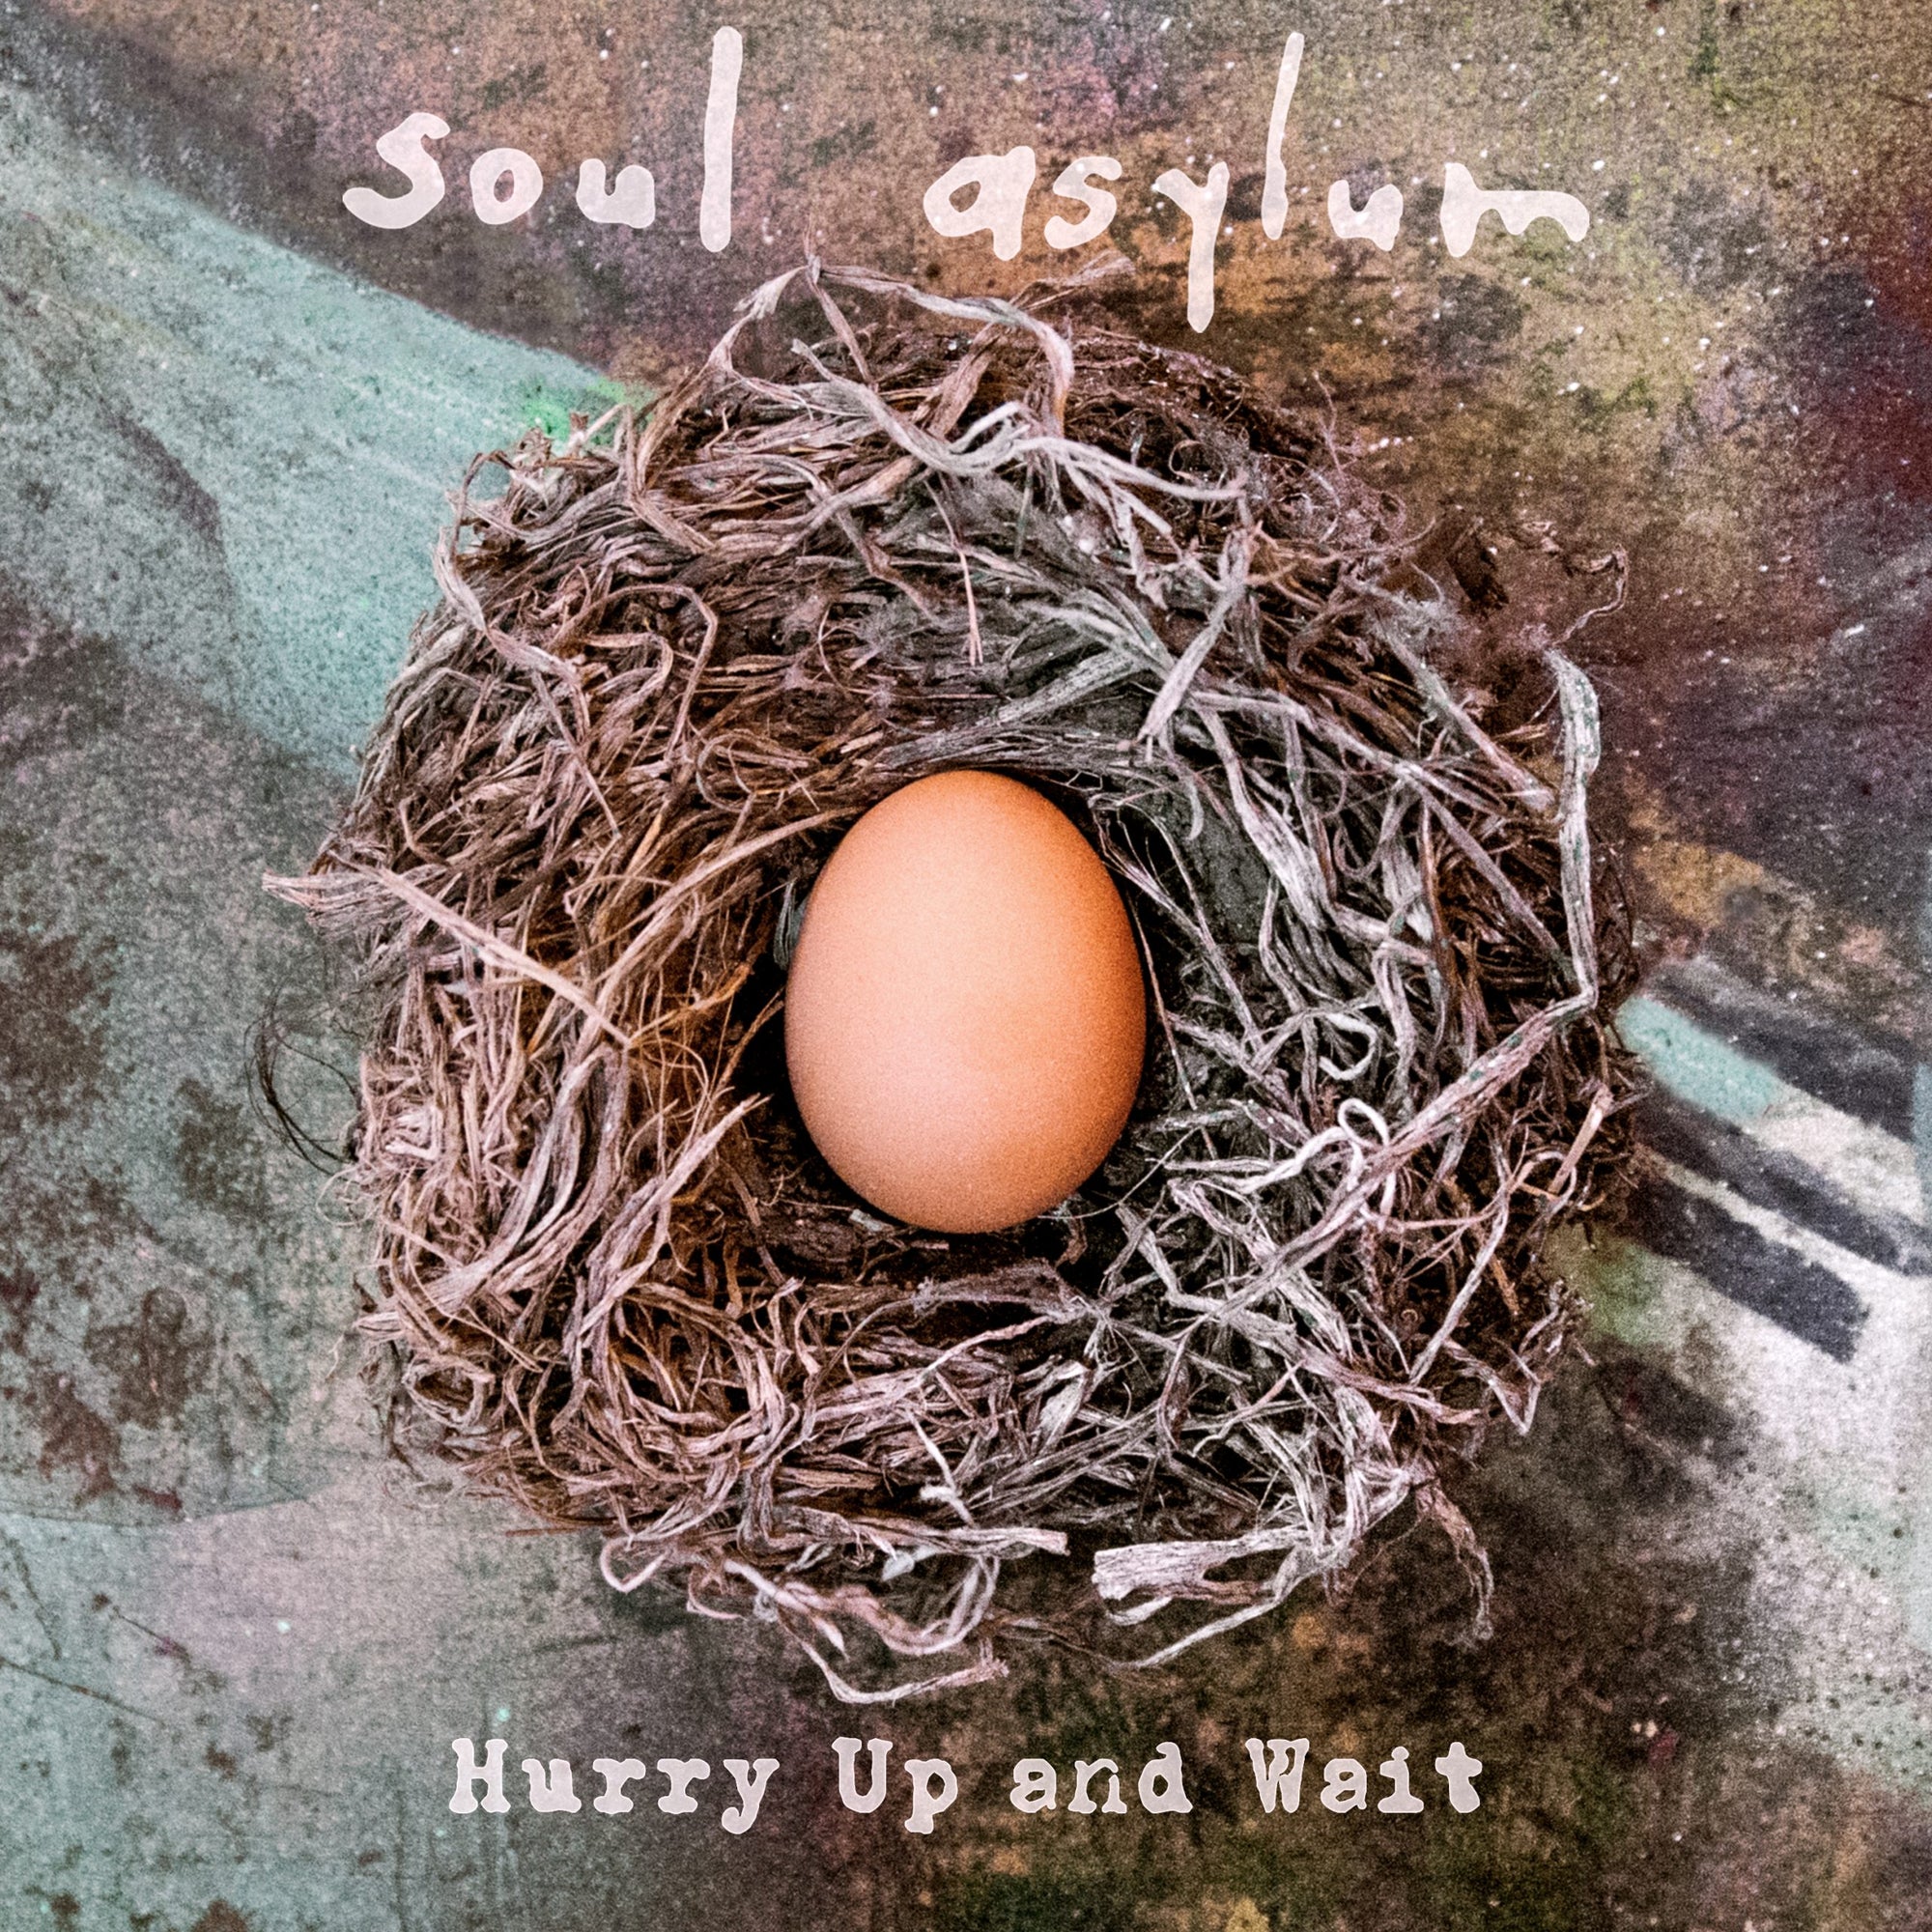 Soul Asylum celebrate one year of Hurry Up and Wait with new Cassette release